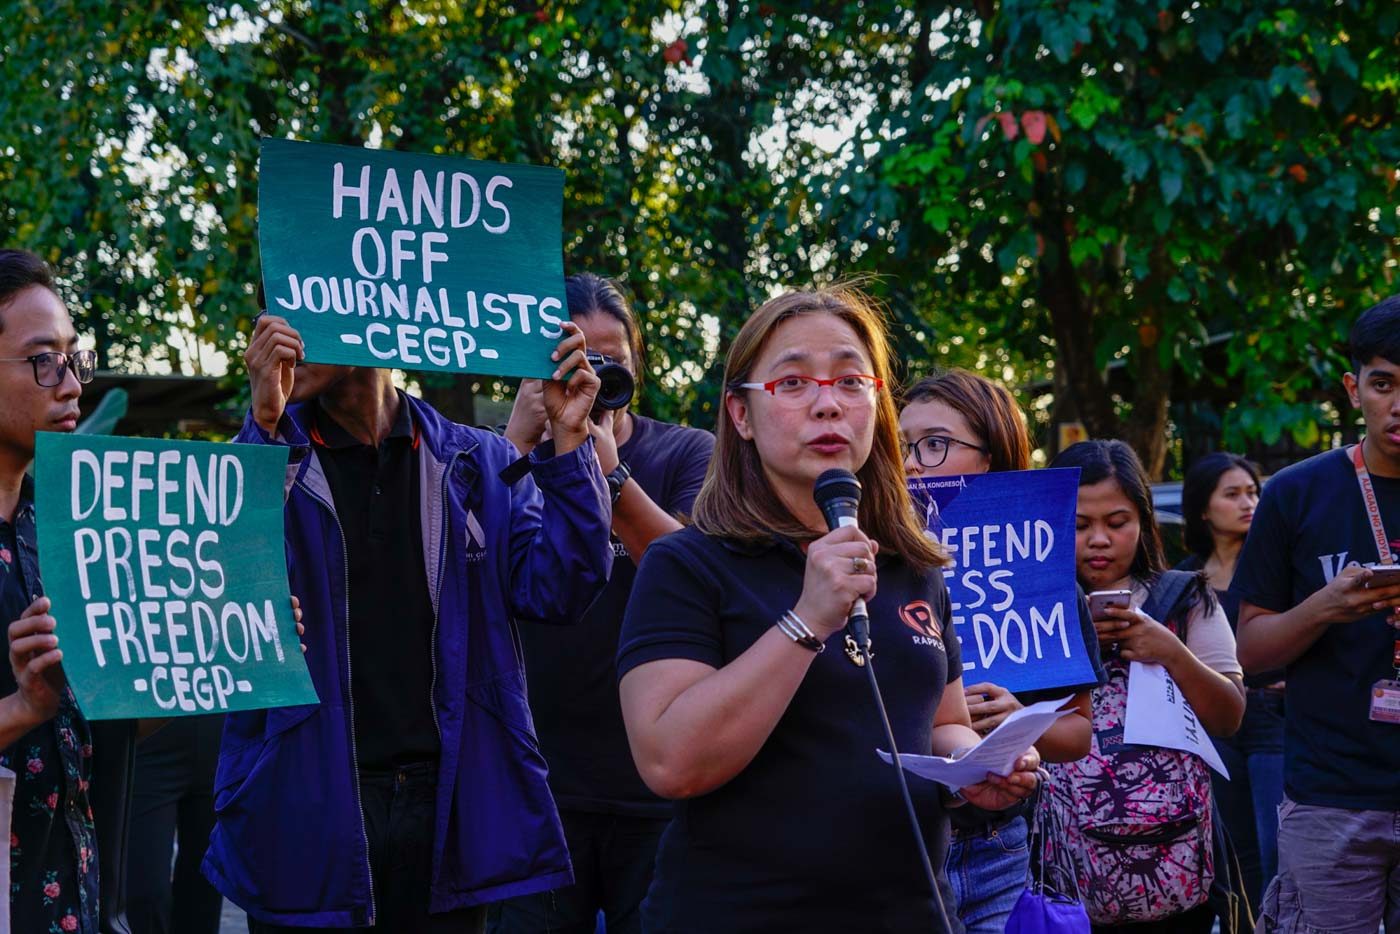 SPEAK OUT. Rappler's Gemma Bagayaua Mendoza talks about how integral press freedom is to democracy in a protest at UP CMC Veranda on February 14, 2019. Photo by Maria Tan/Rappler  